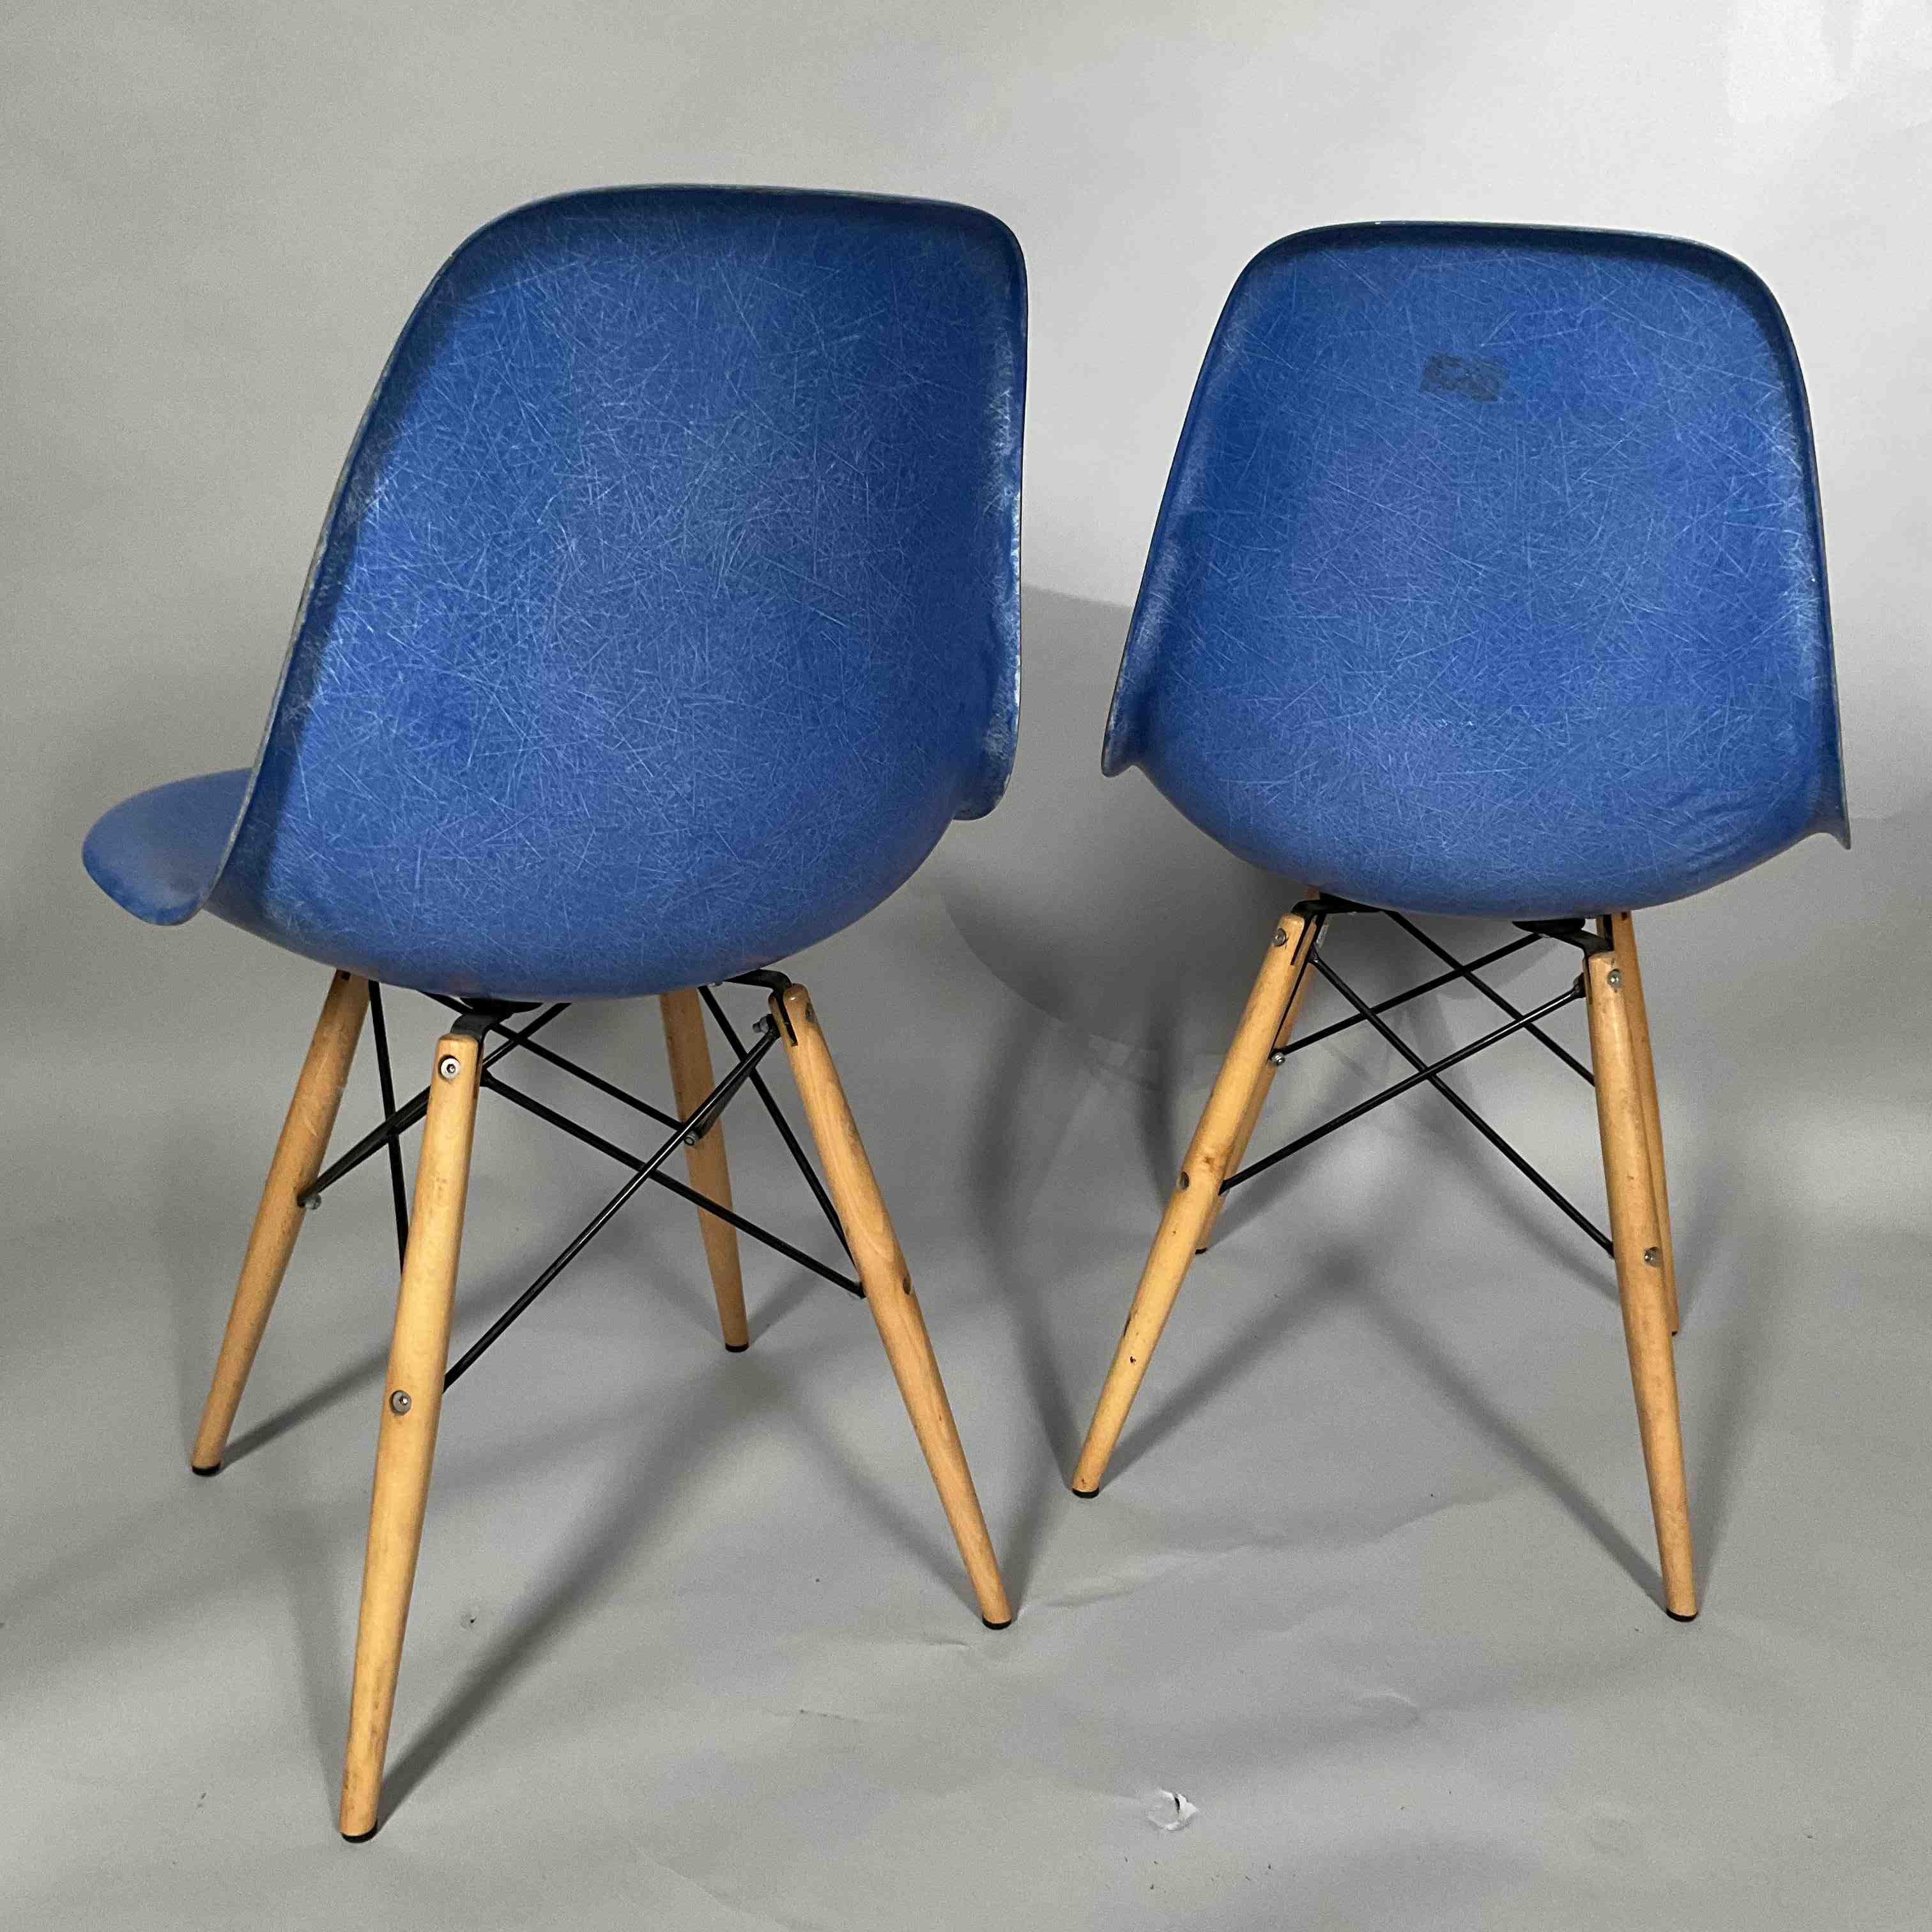 Charles (1907-1978) et Ray (1912-1989) EAMES - Edition Herman Miller
PAIRE...